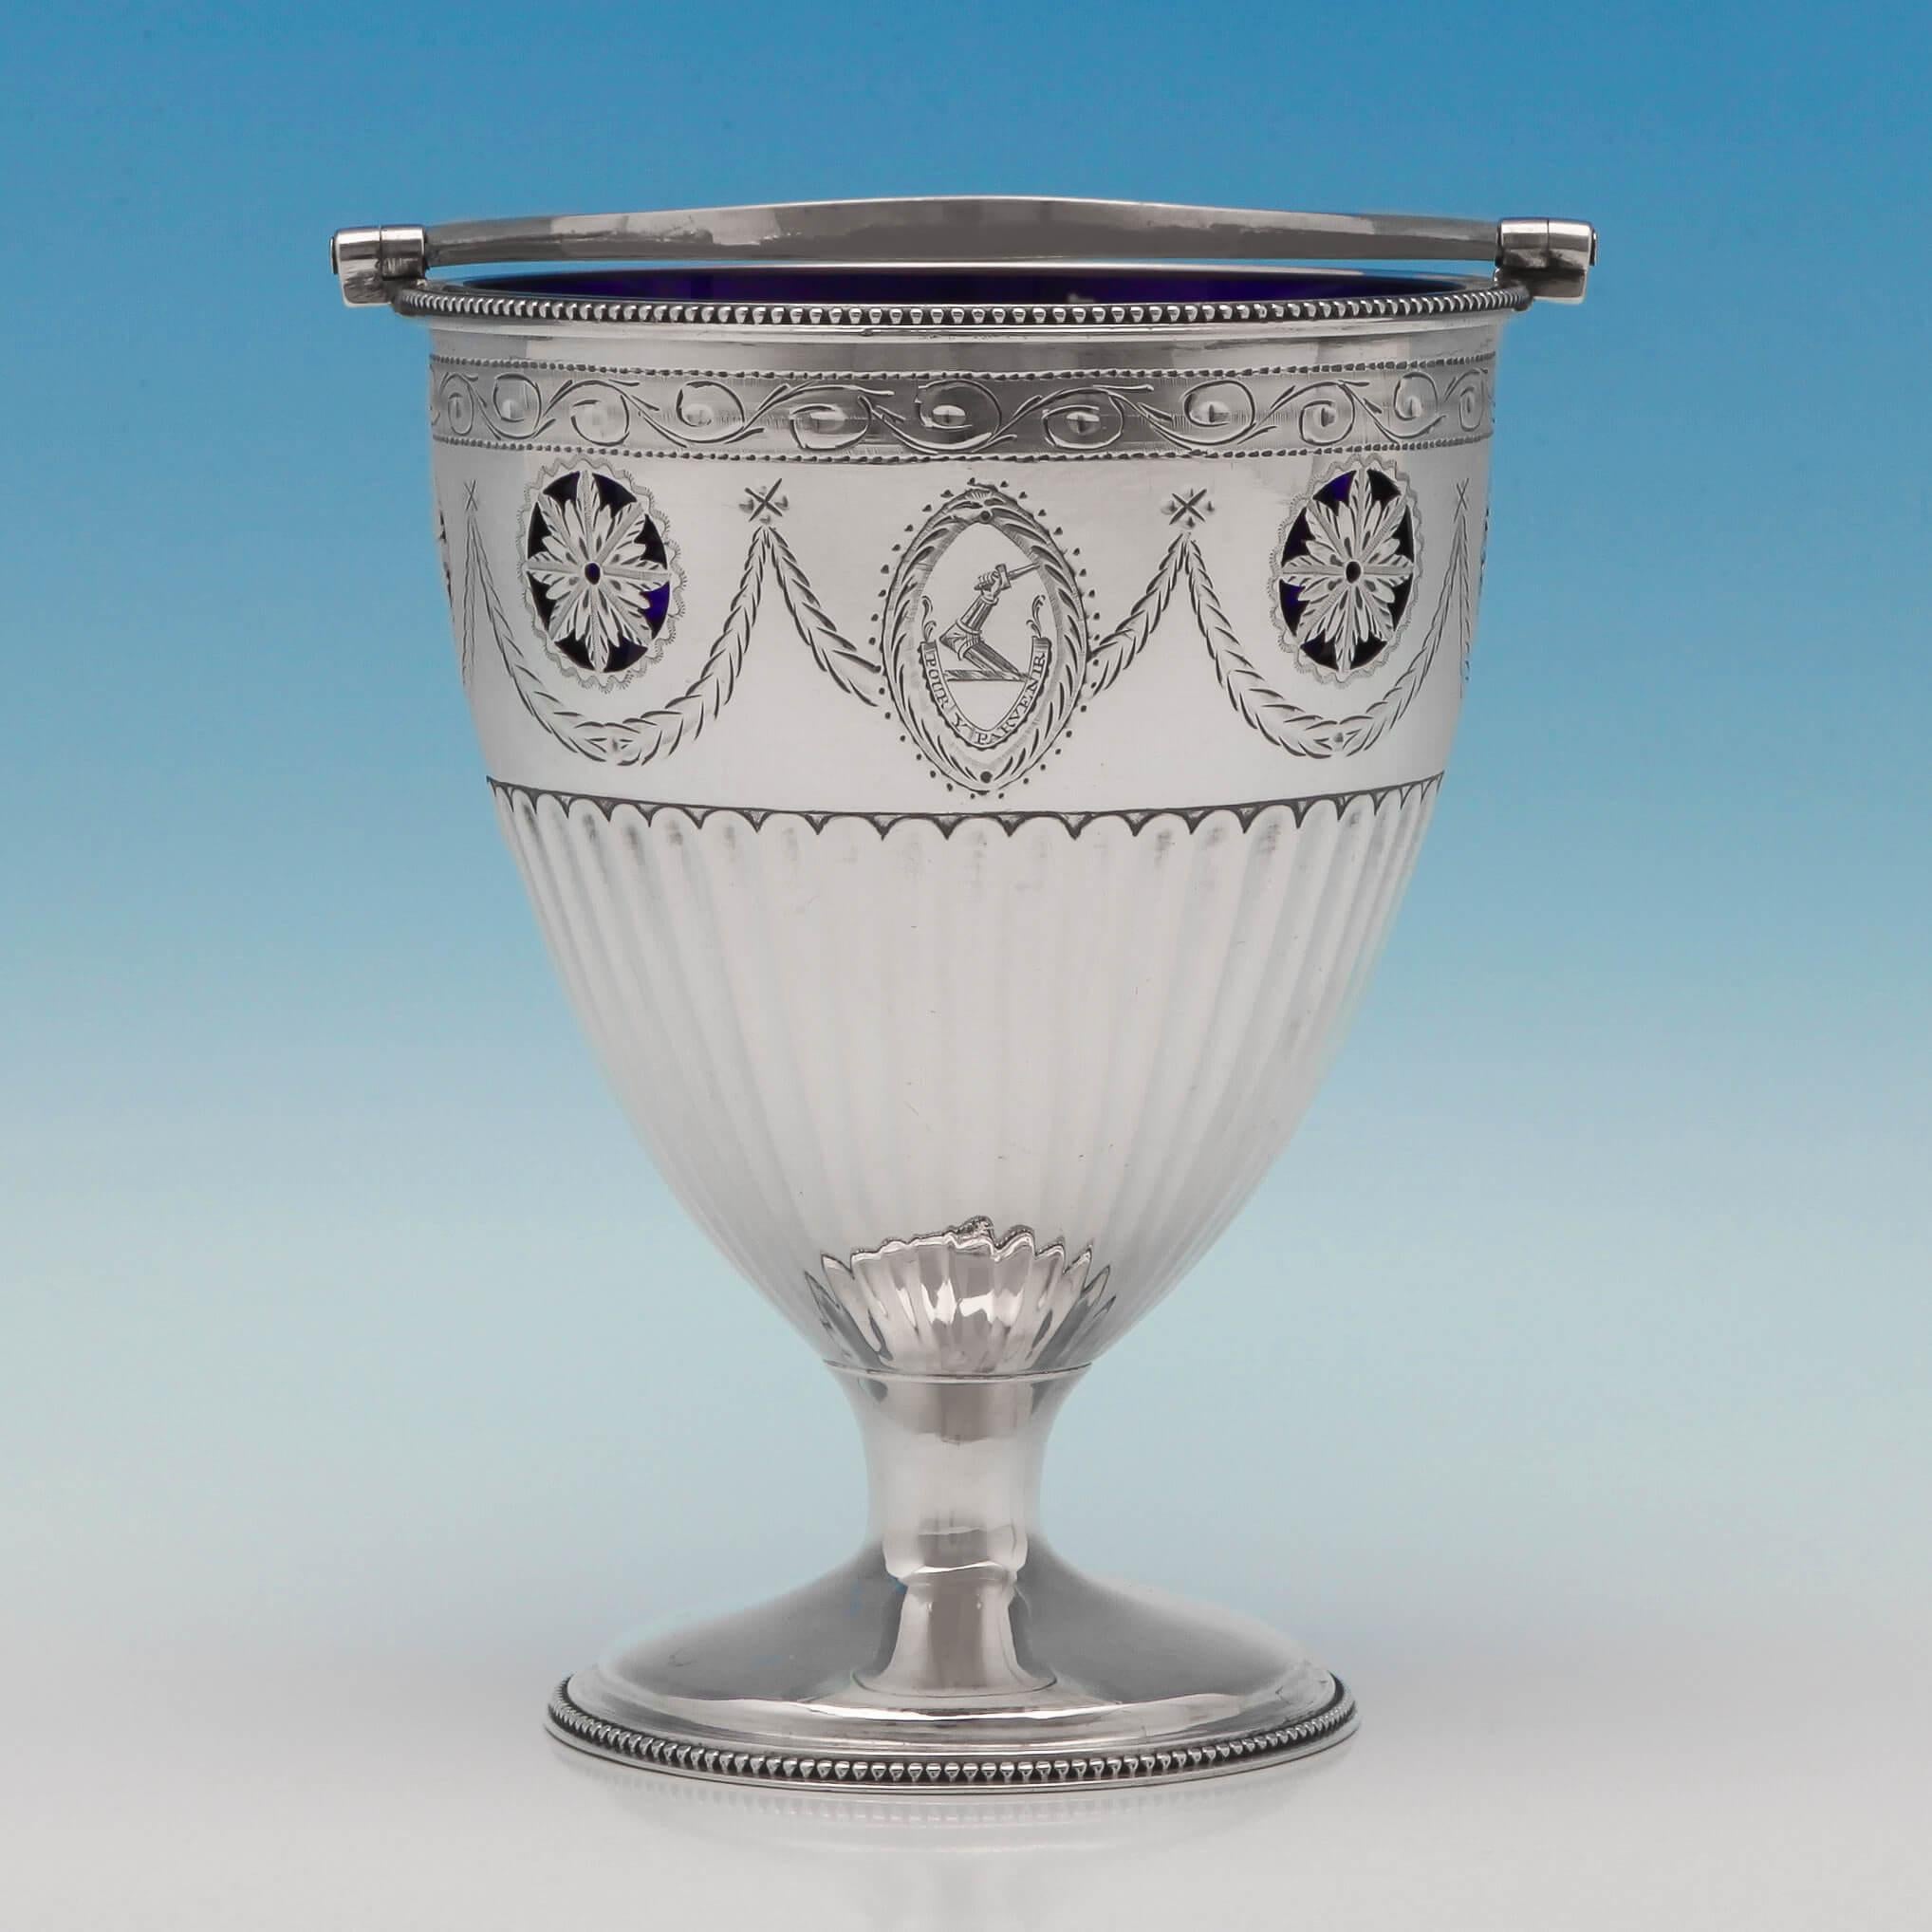 Hallmarked in London in 1783 by Barrage Davenport, this delightful, George III, antique, sterling silver sugar basket, has a half fluted body with bead borders, a blue glass liner and a beaded swing handle. Featuring pretty pierced floral motifs